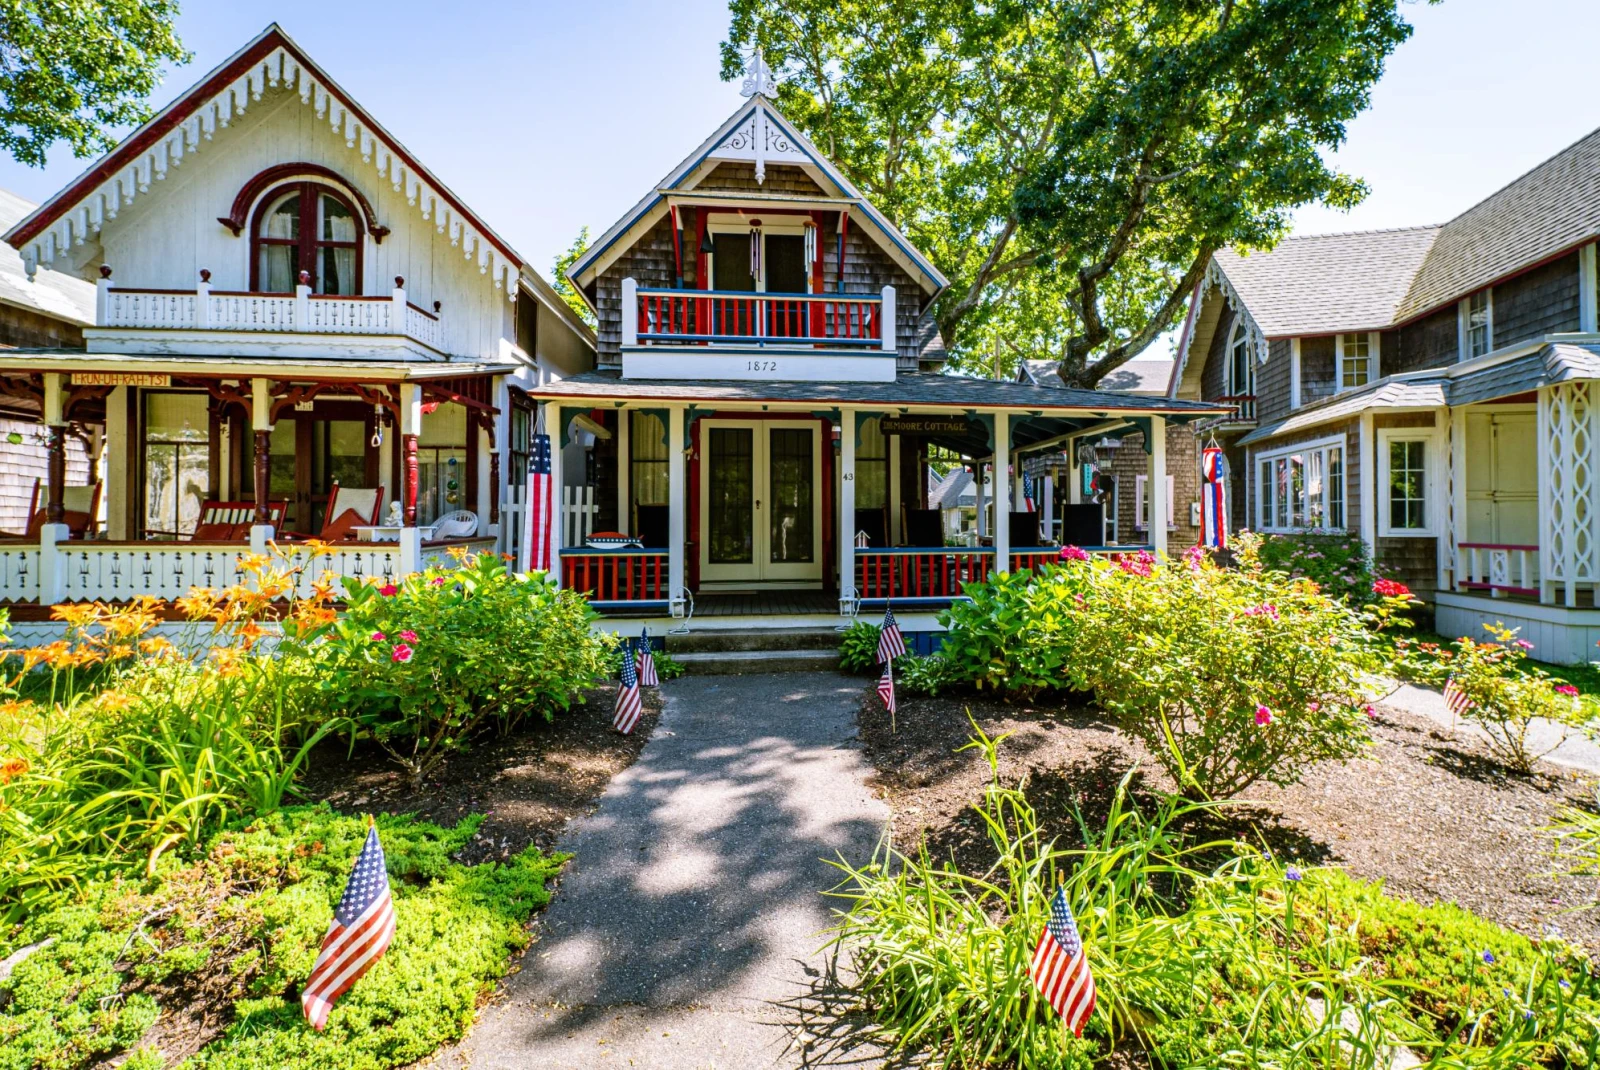 charming houses decorated like gingerbread houses in red white and blue colors with american flags in the front yard